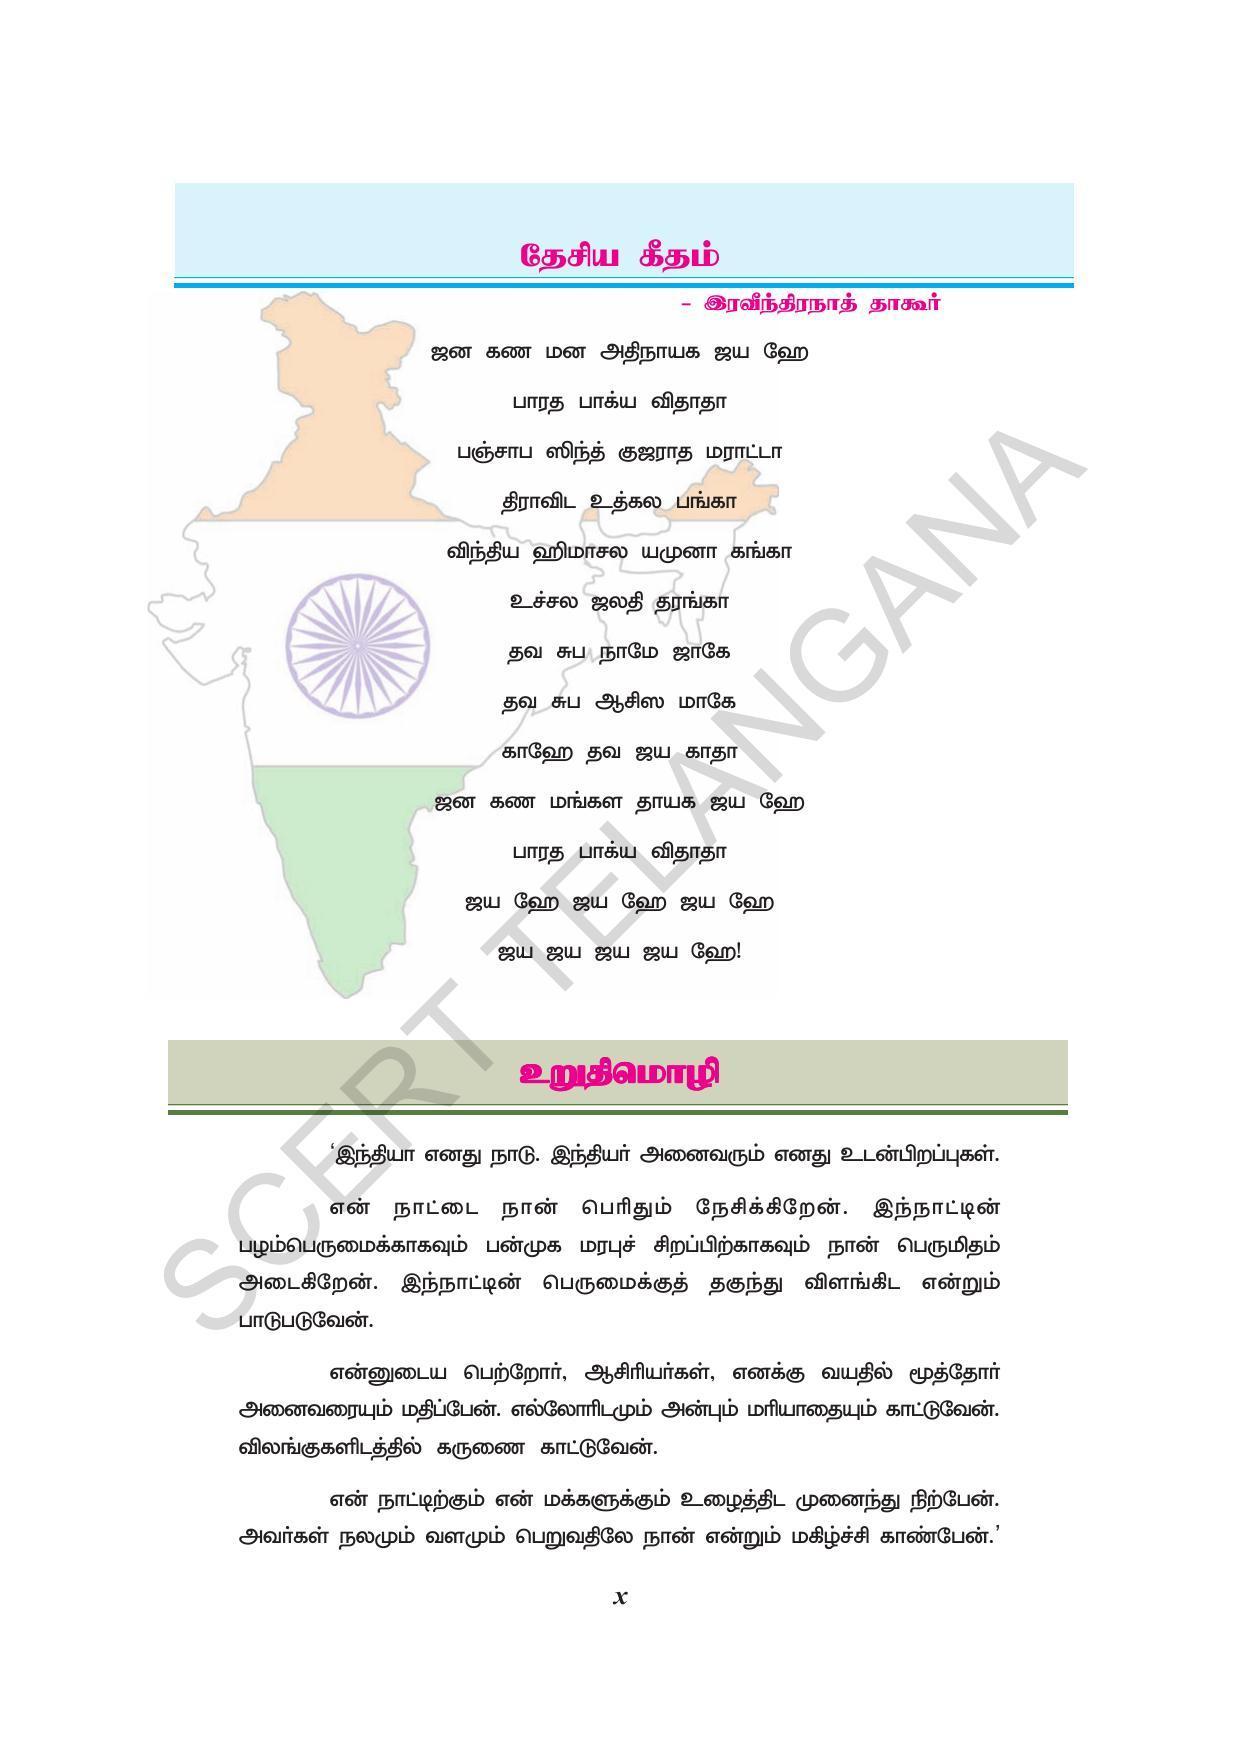 TS SCERT Class 10 Physical Science(Tamil Medium) Text Book - Page 12